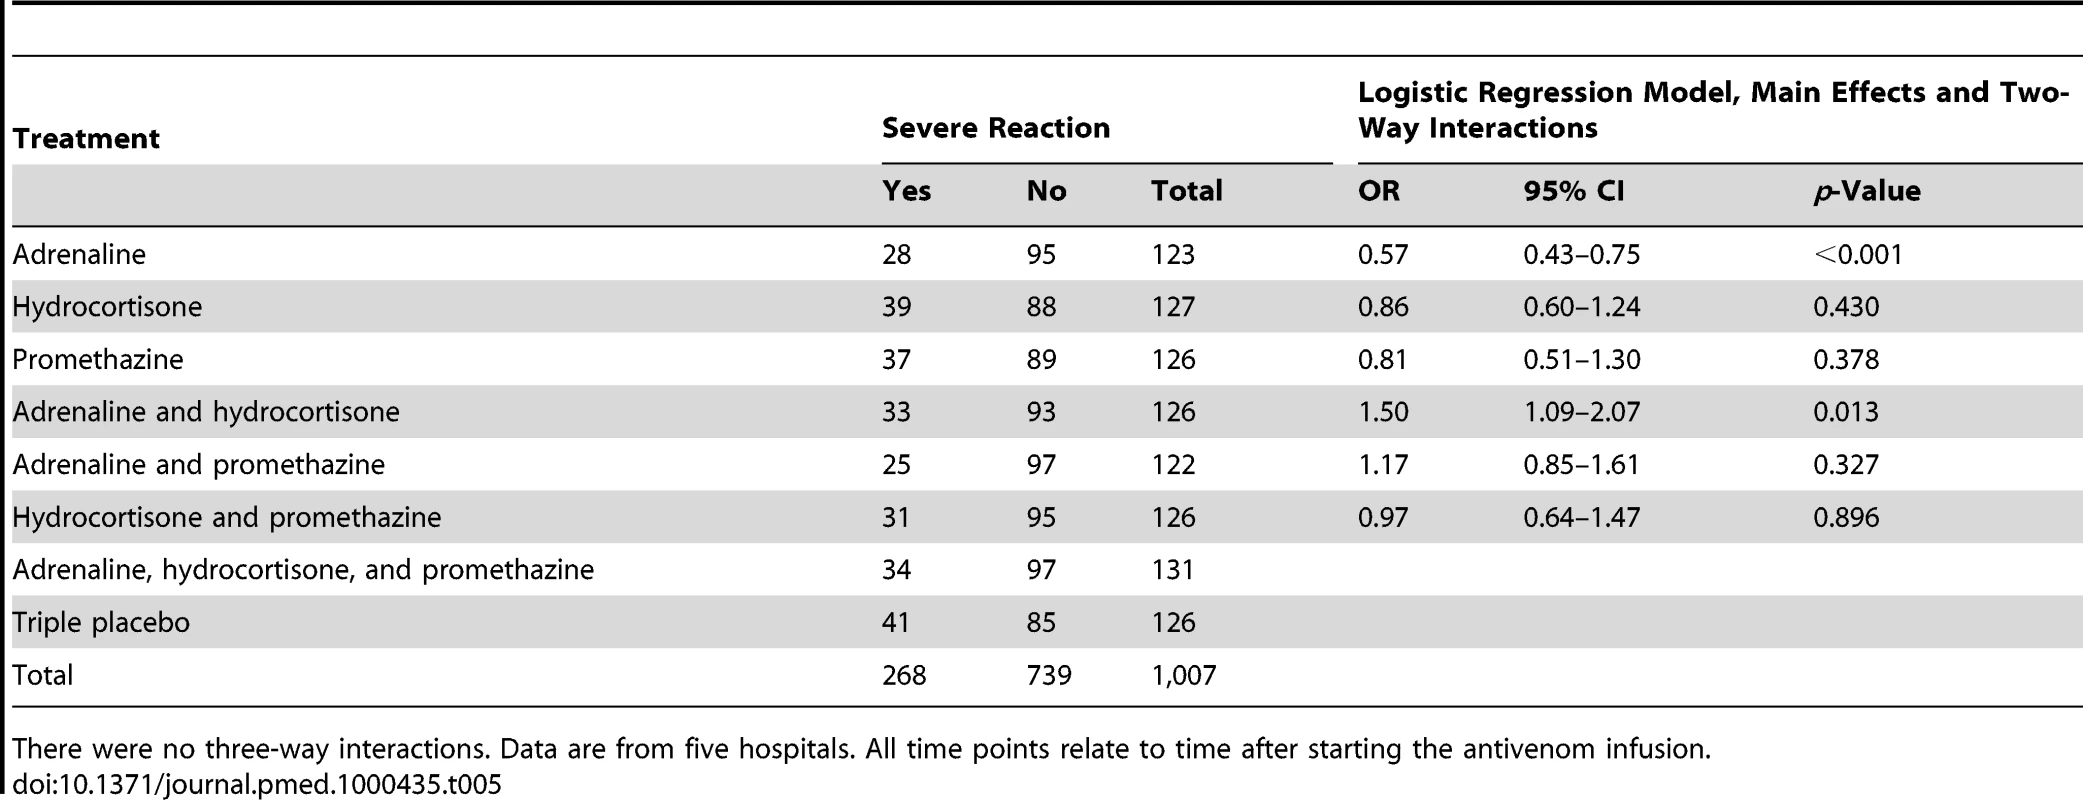 Risk of severe reaction during the first hour by treatment: main effects and two-way interactions adjusted for clustering by trial site.